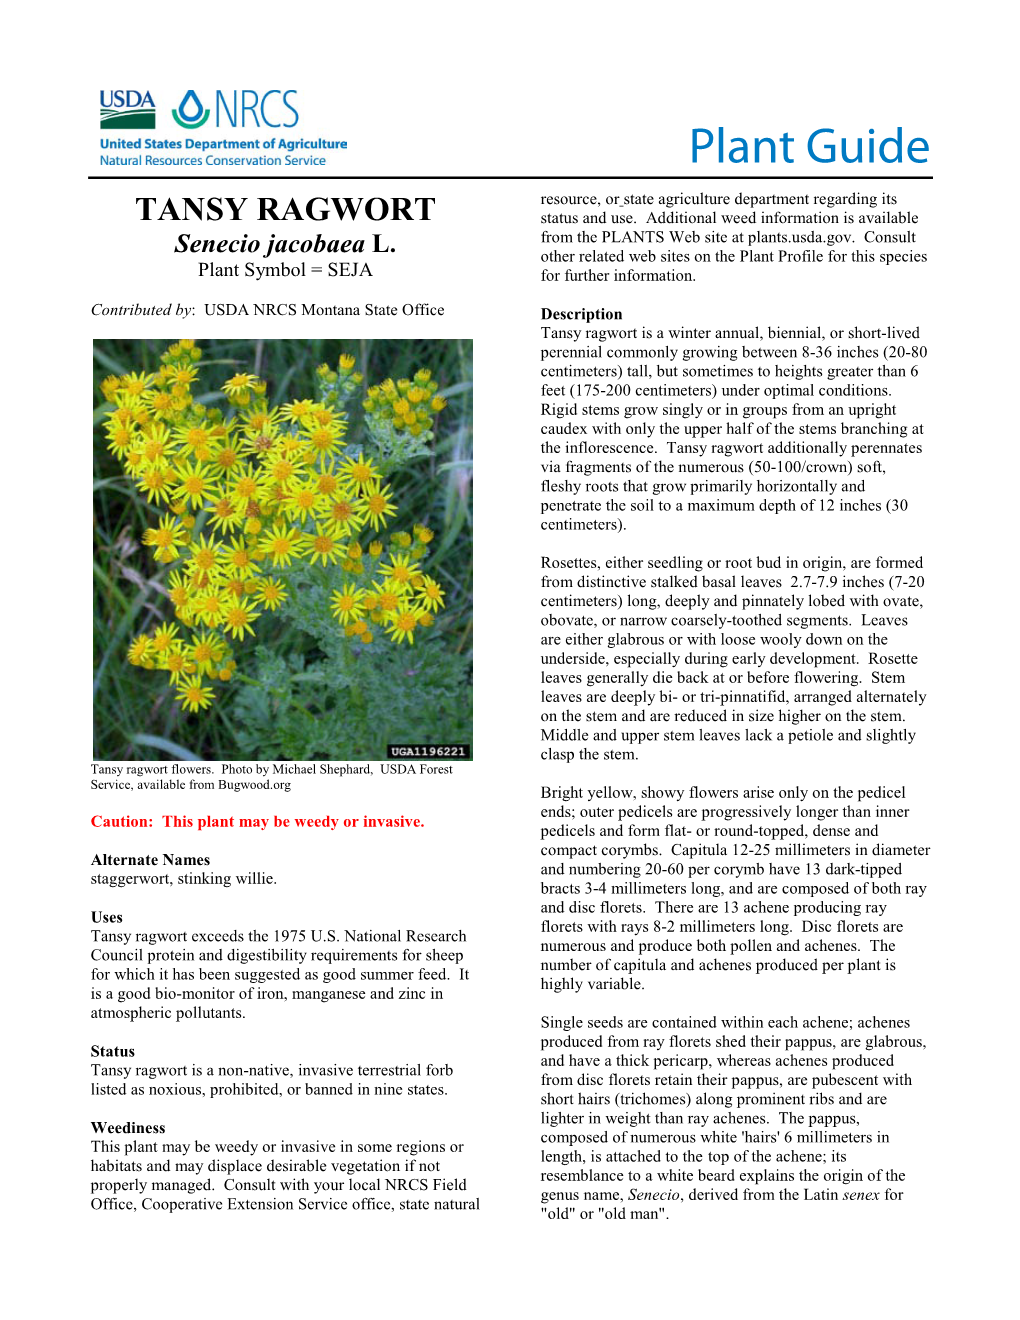 TANSY RAGWORT Status and Use